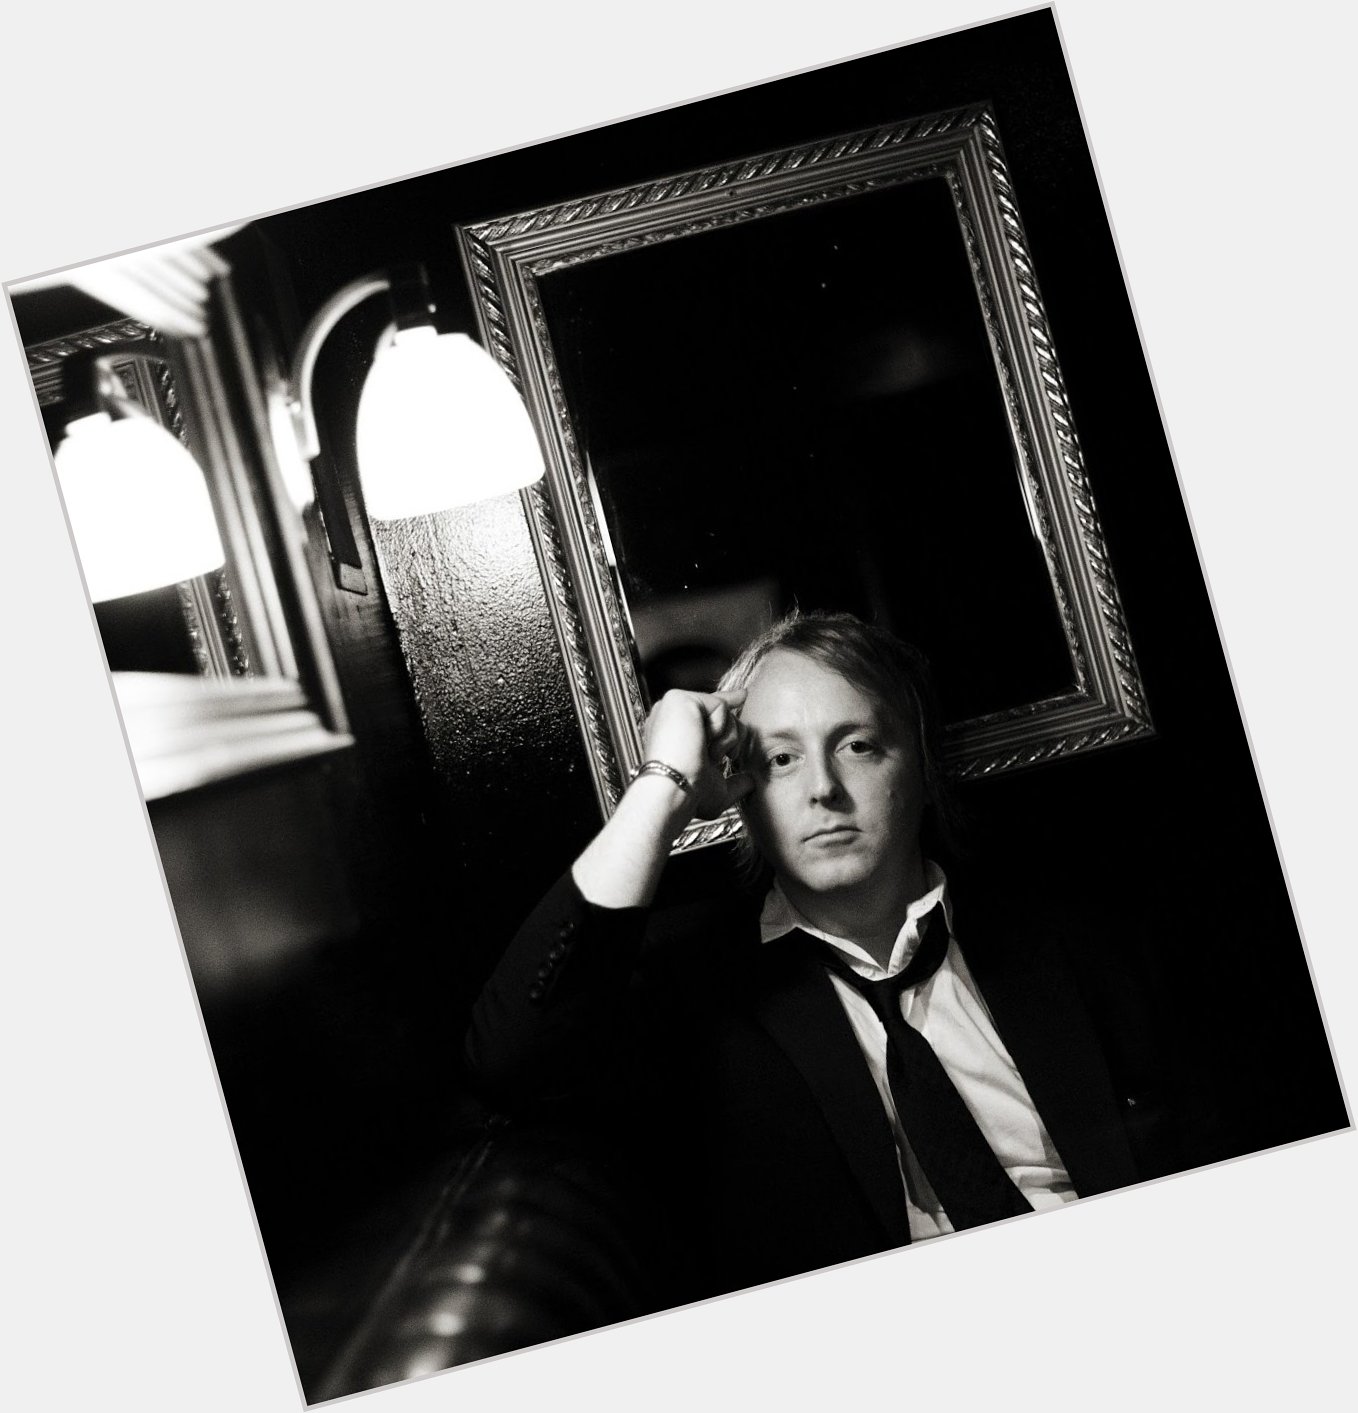 Happy birthday to james mccartney! wish him all the best! and i\m still waiting for his new music 